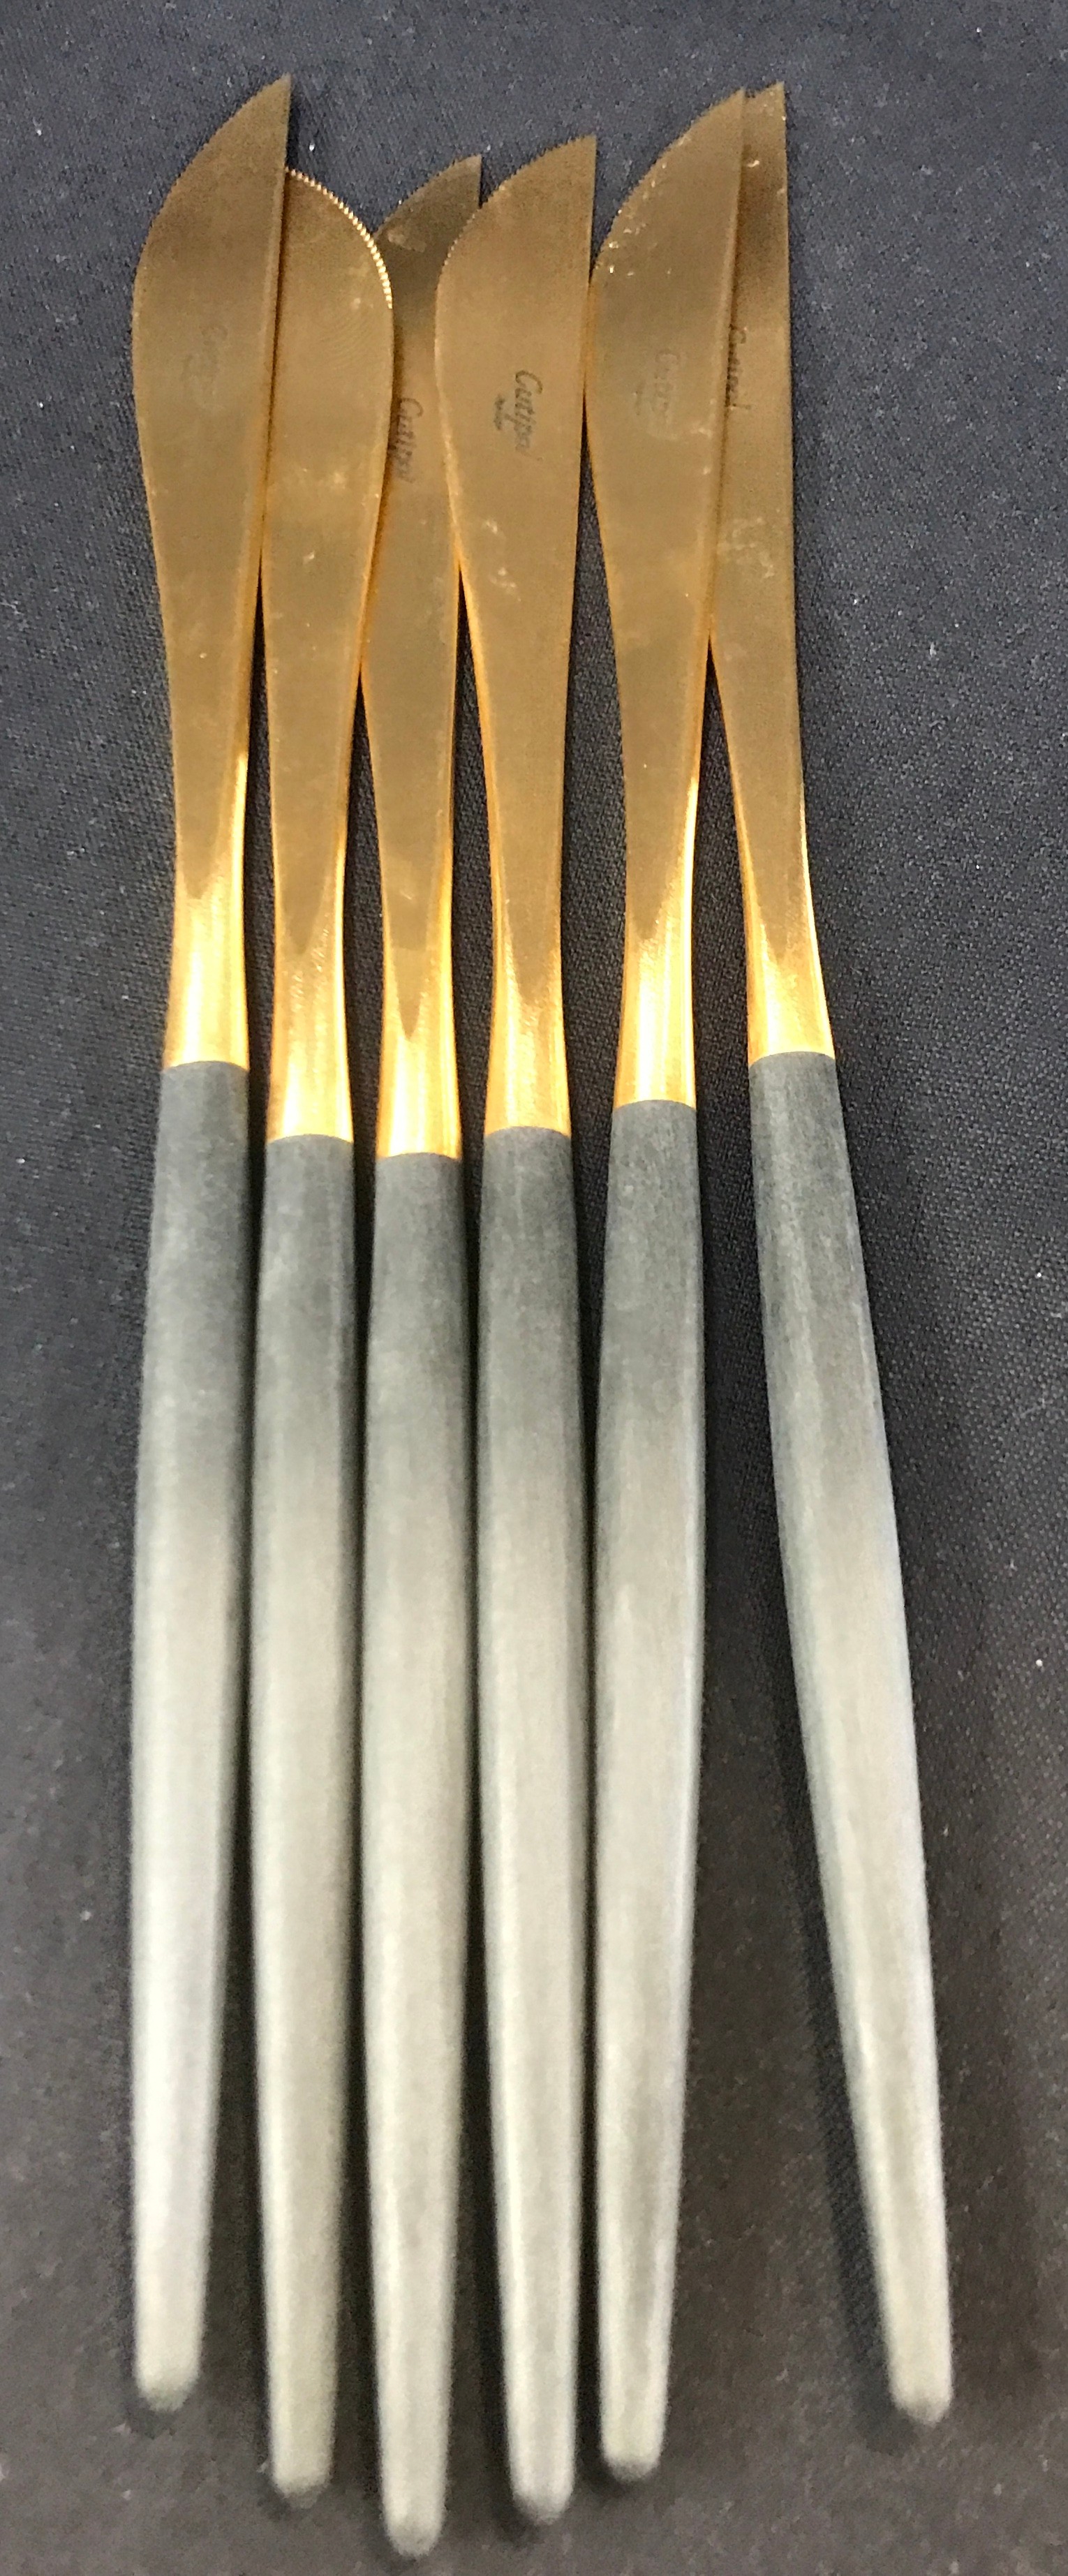 Boxed 24 place setting Cutipol cutlery matte black and gold plated - Bild 4 aus 4